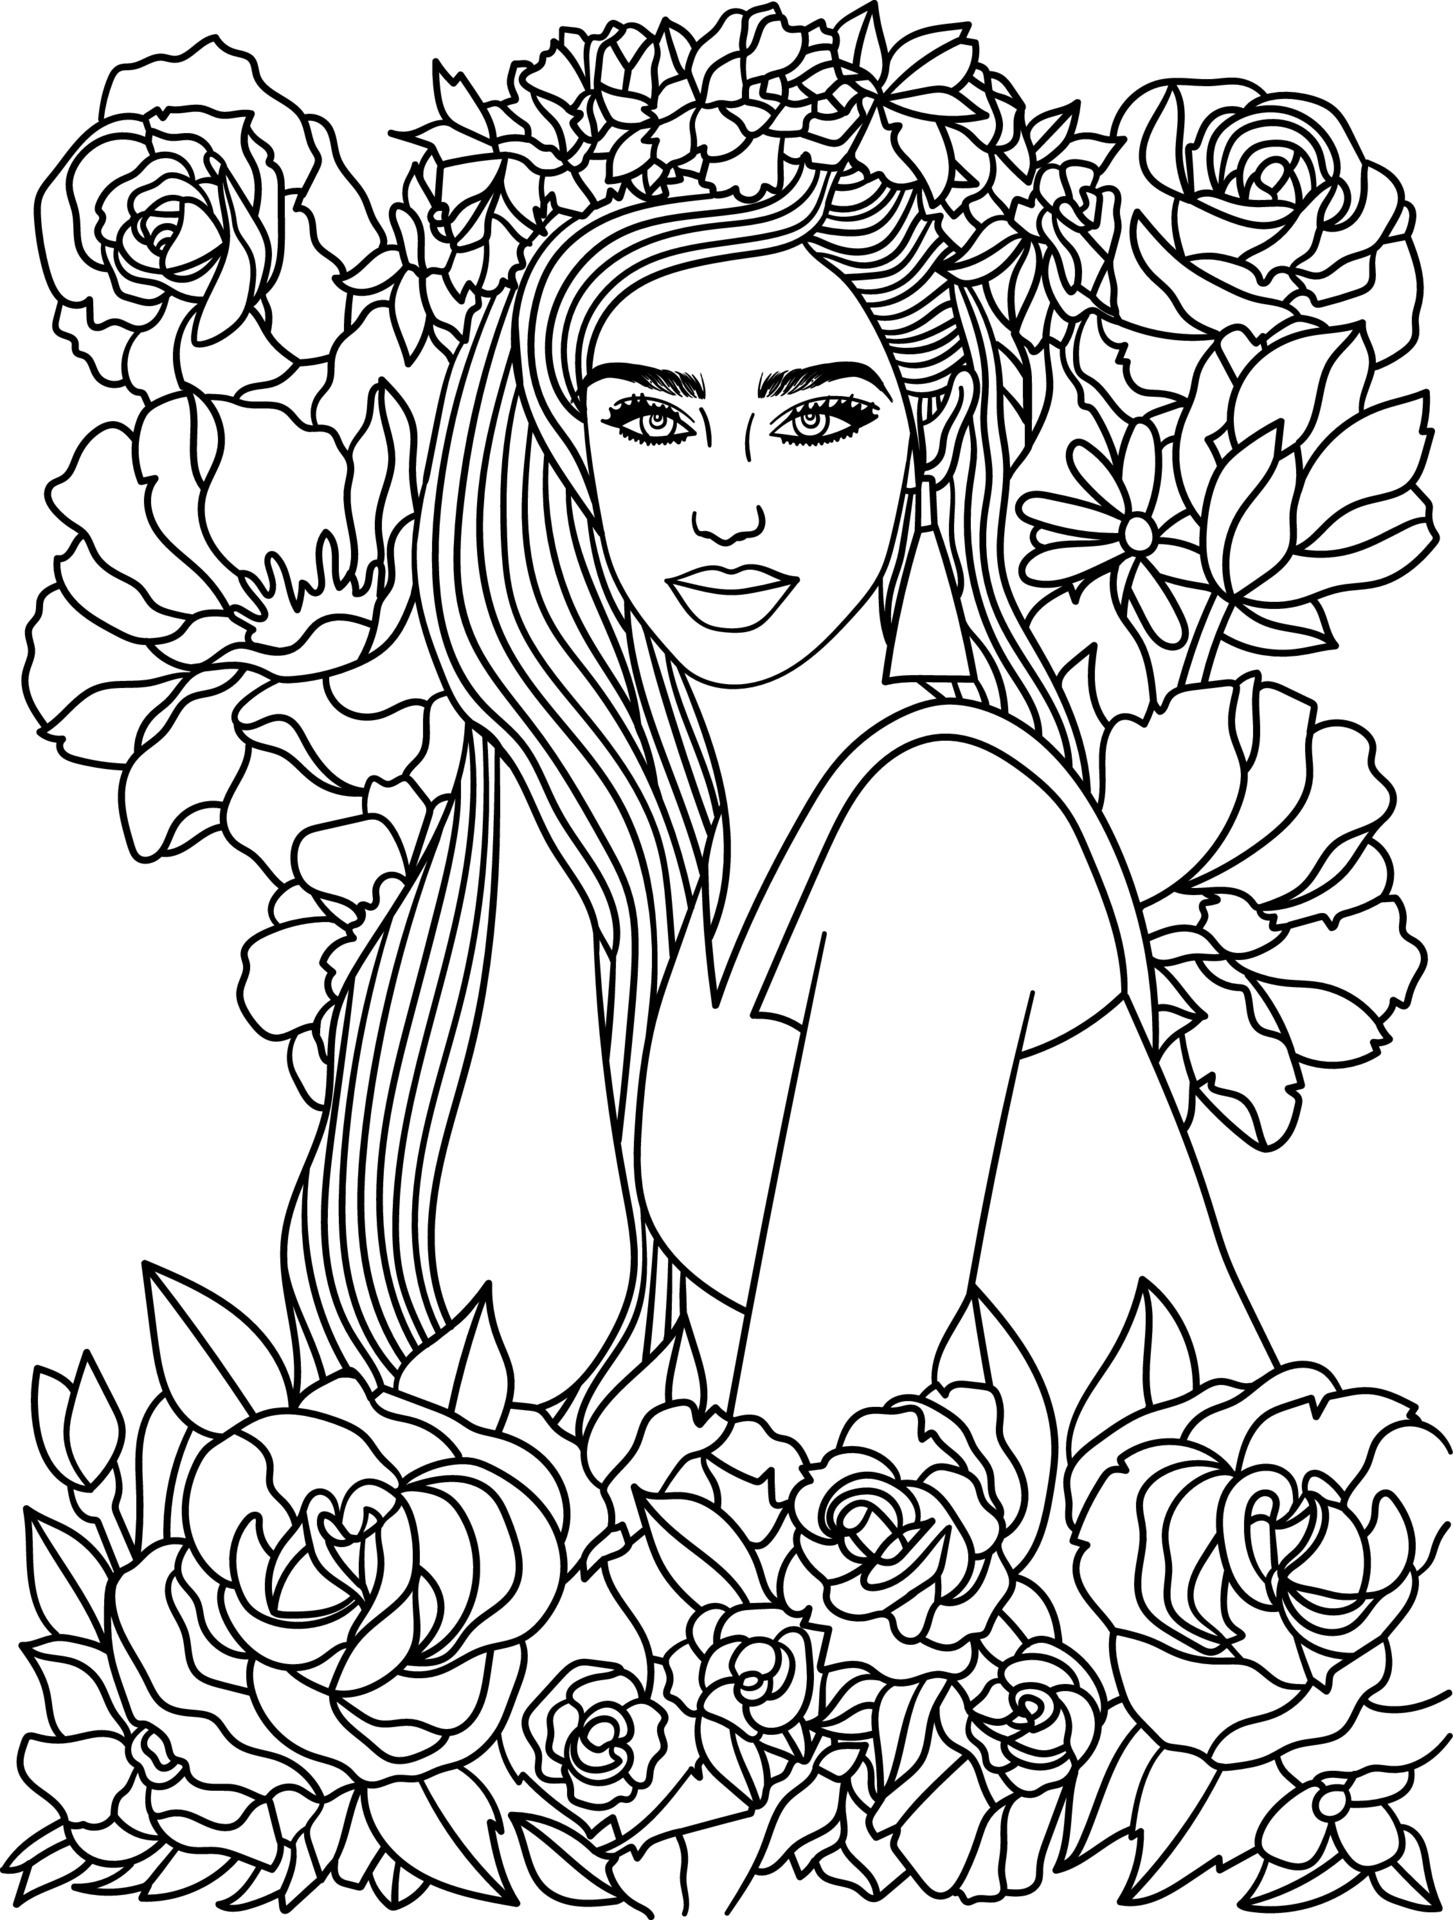 Cute Flower Girl Coloring Page for Adults 20 Vector Art at ...